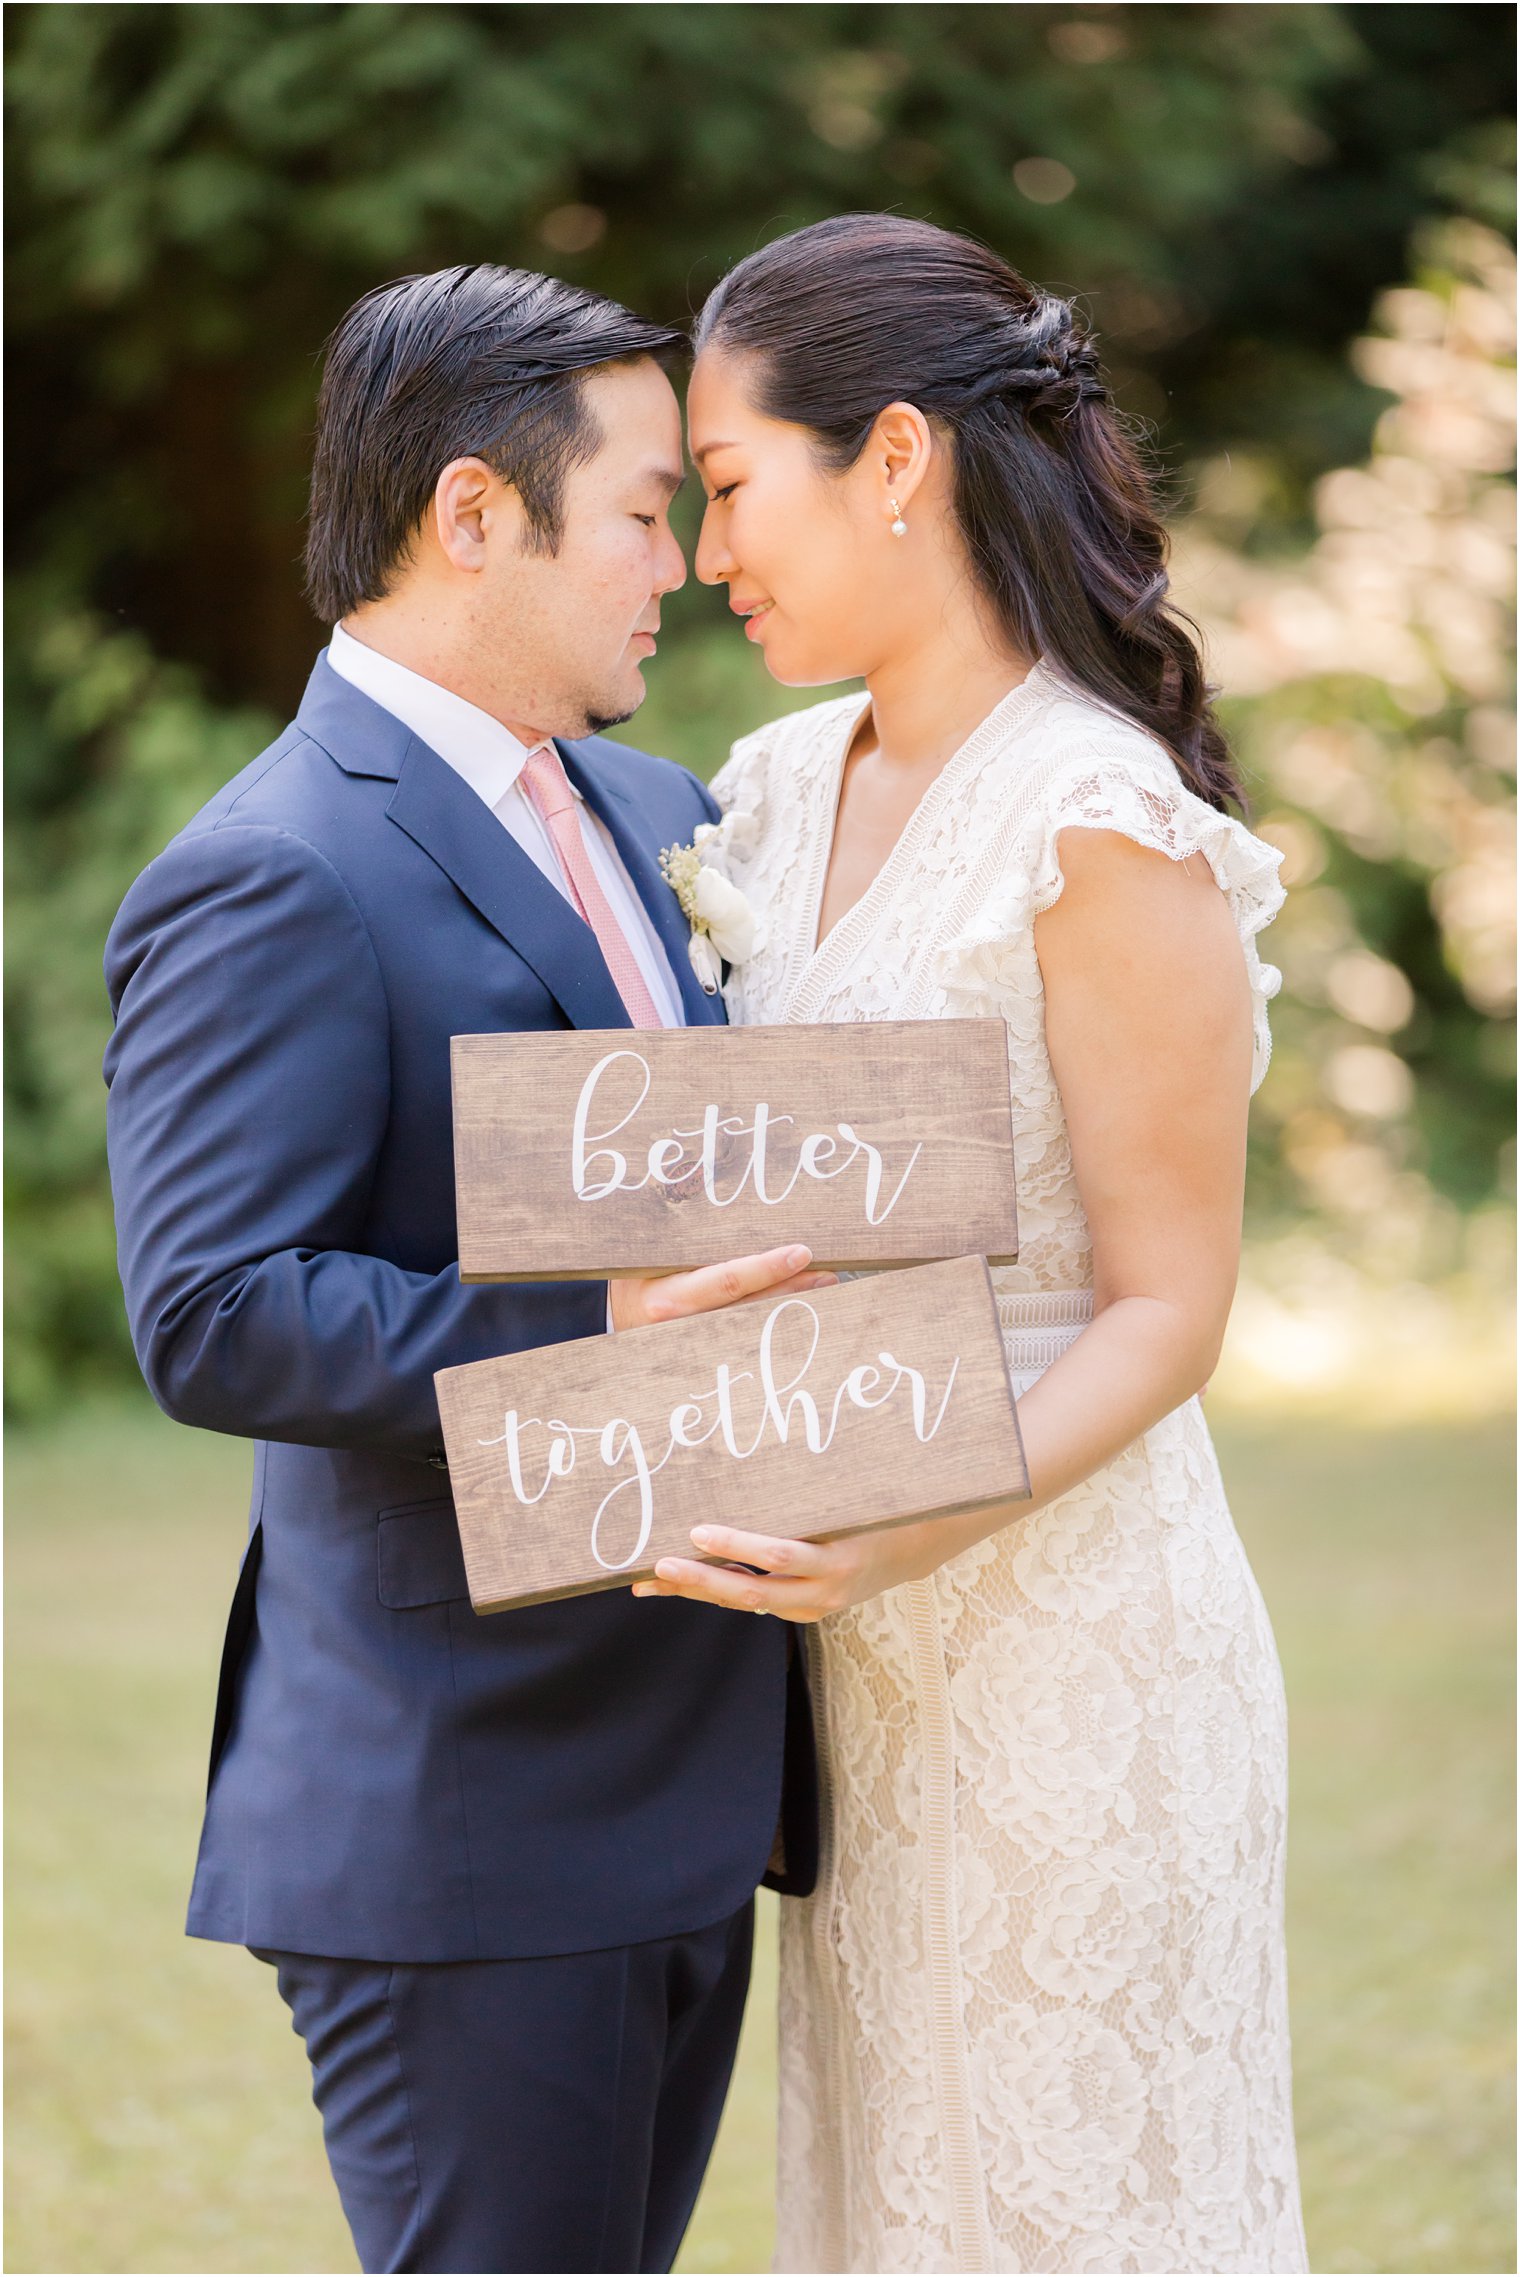 NJ Intimate Wedding with Better Together signs